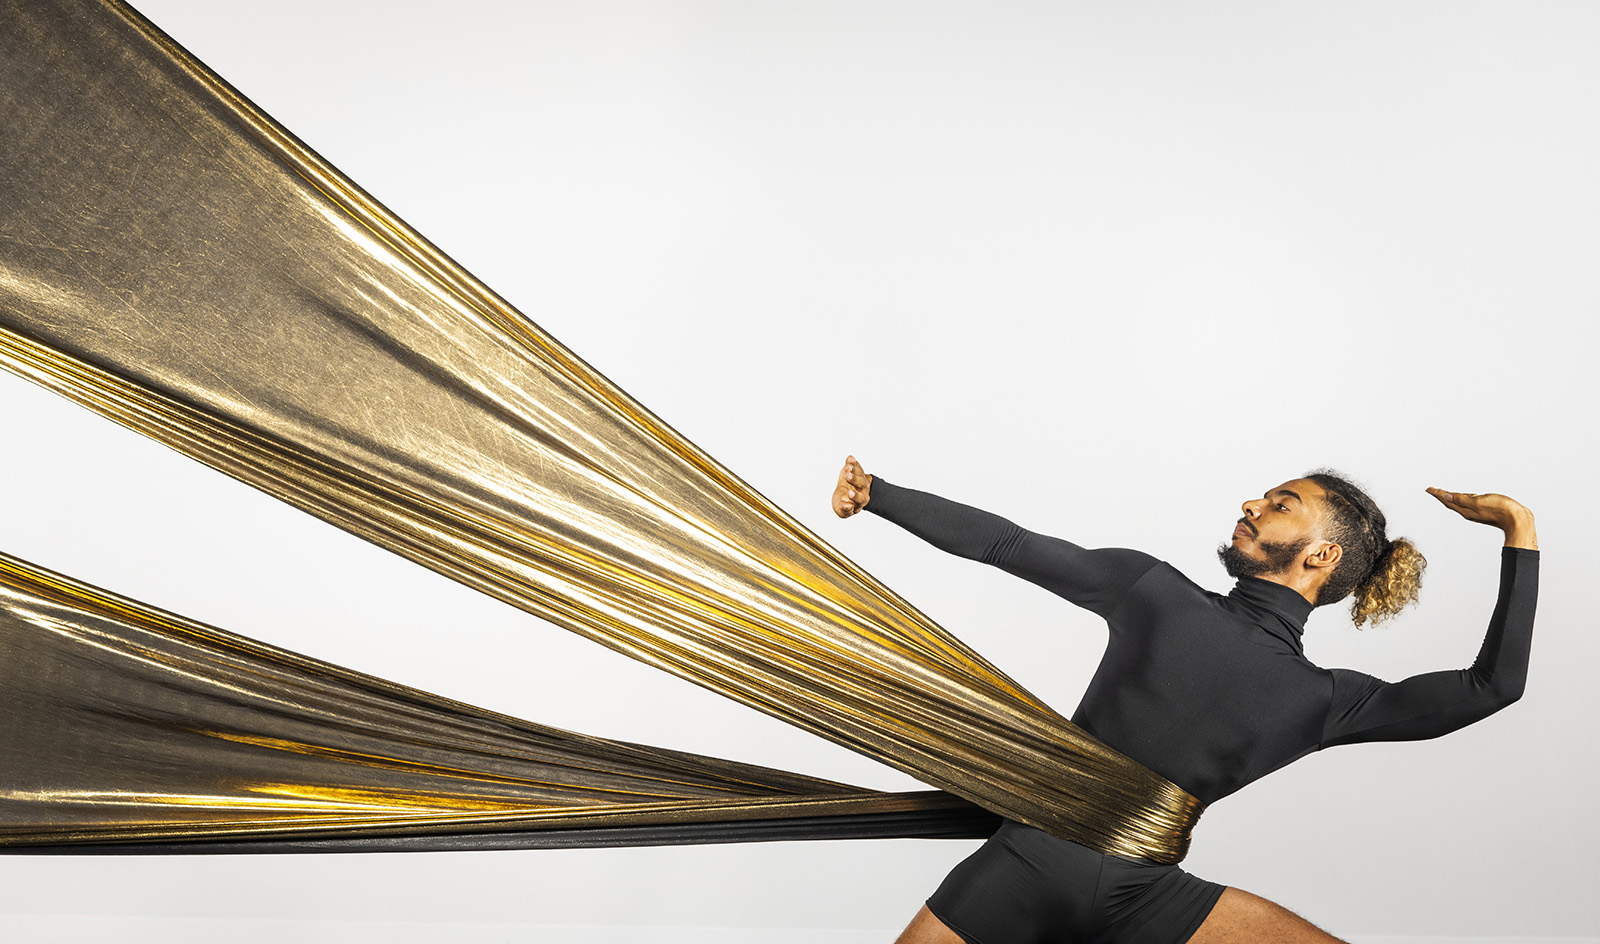 Dancer stretches gold fabric as he leans to the right